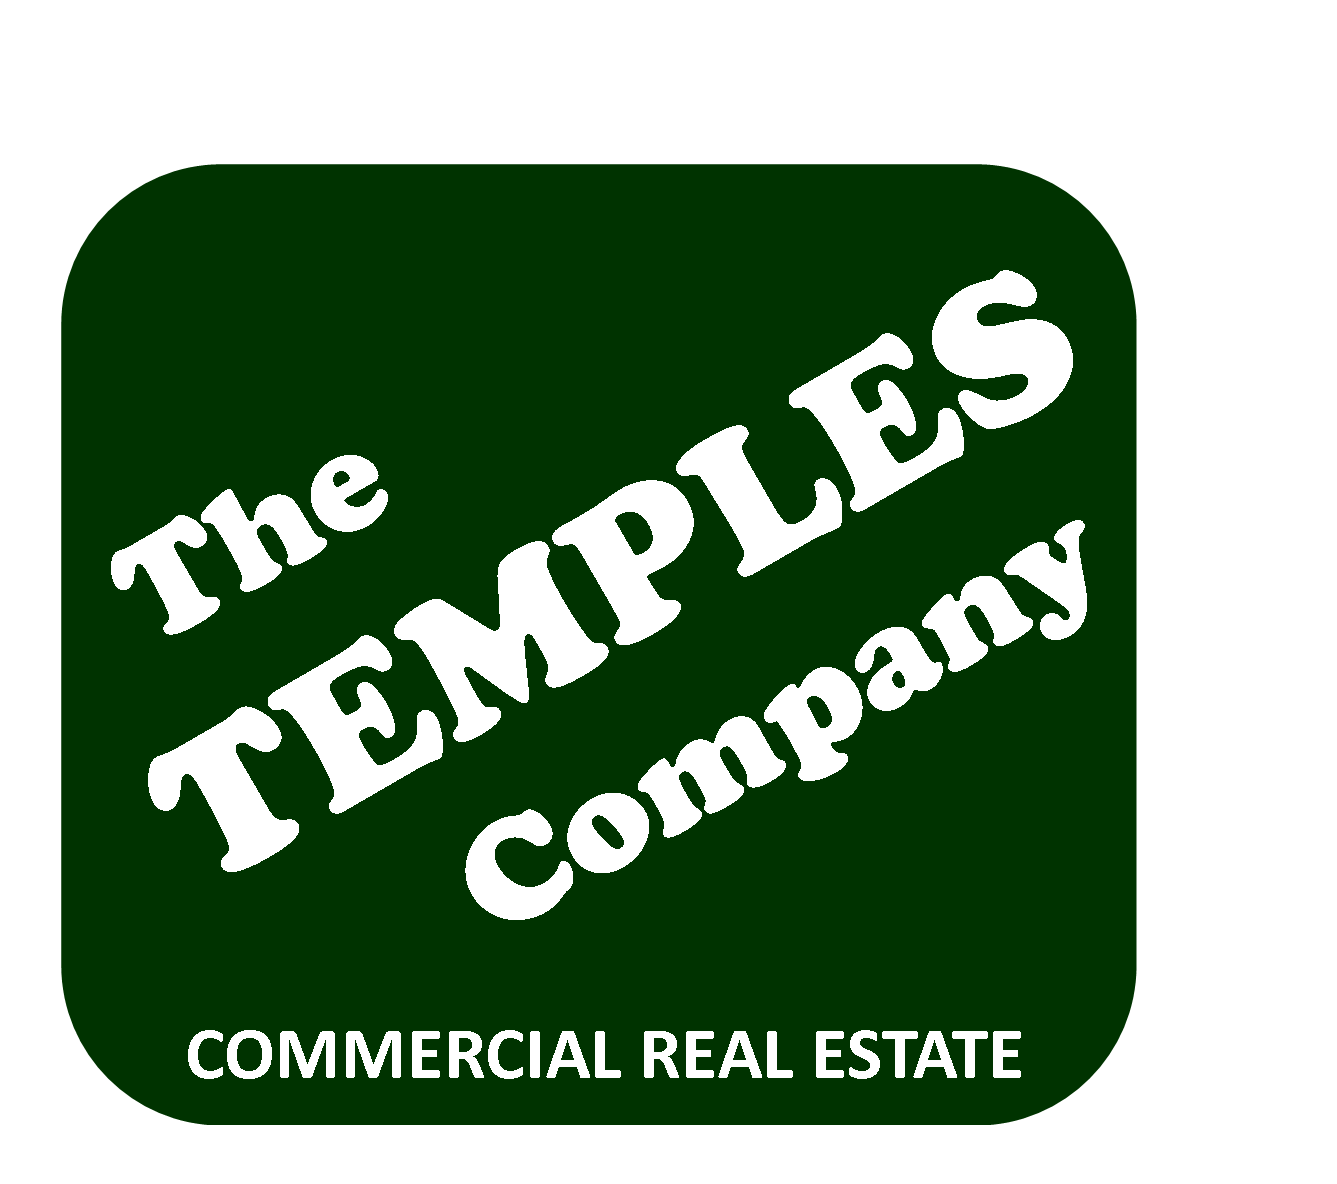 The Temples Company